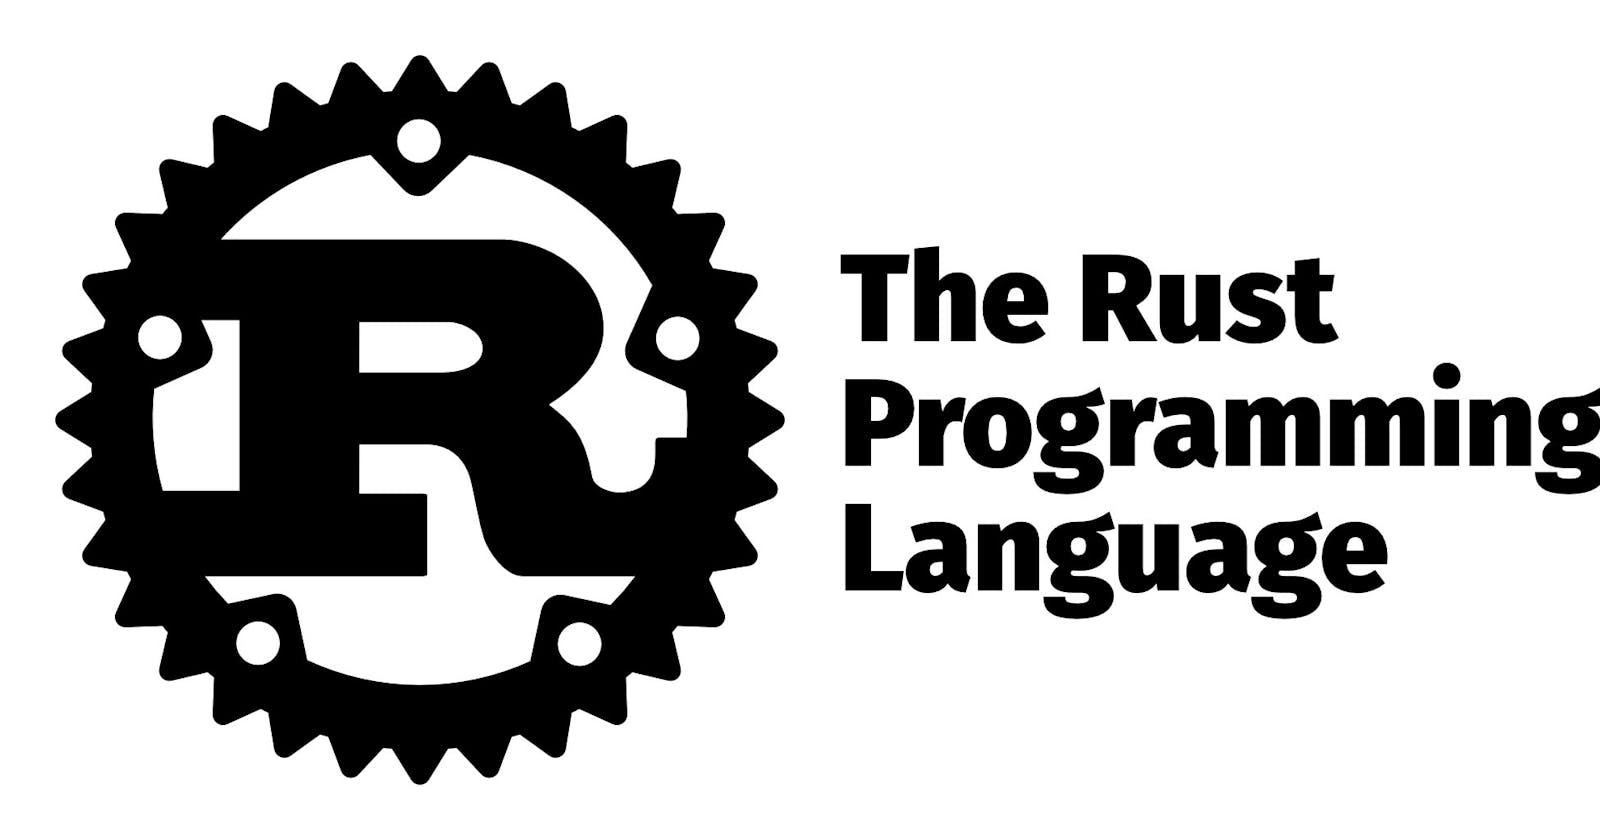 The Rise of Rust: The Essential Programming Language for the Modern Age